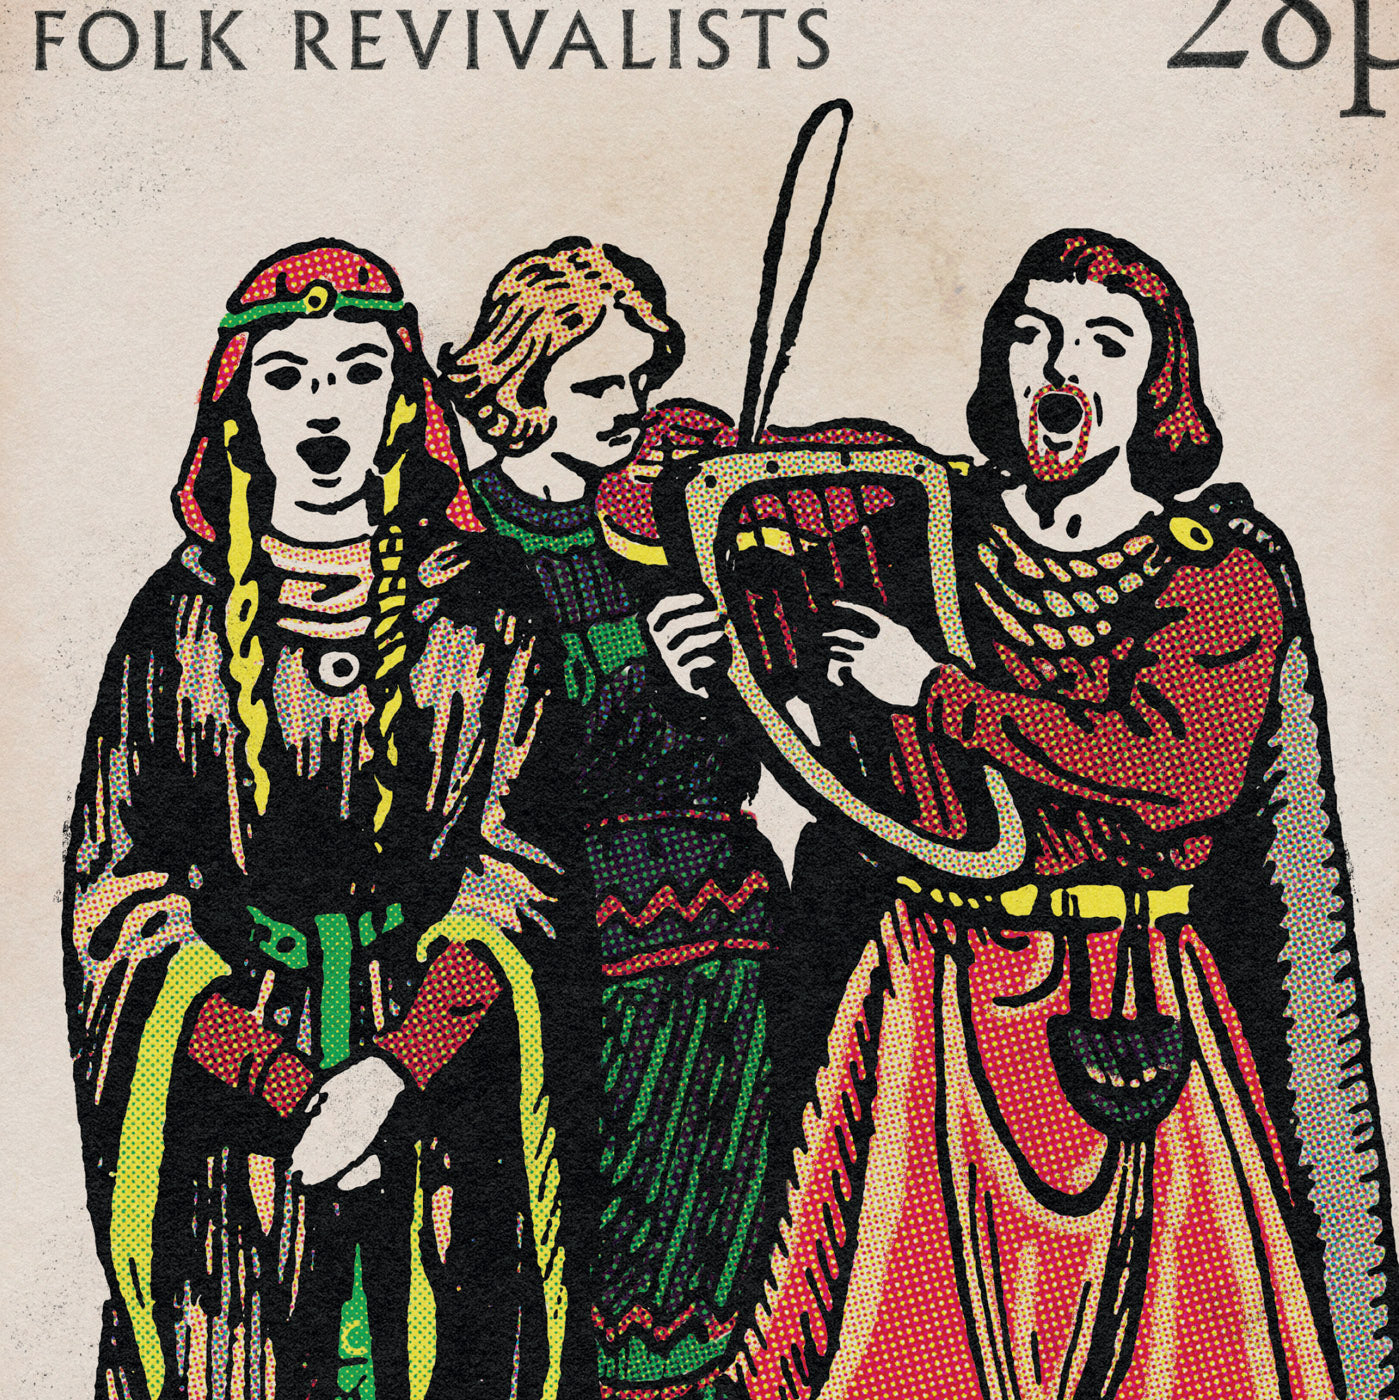 'Folk Revivalists' print. From 'The Musical Tribes Of Britain', a humorous commemorative postage stamp print series